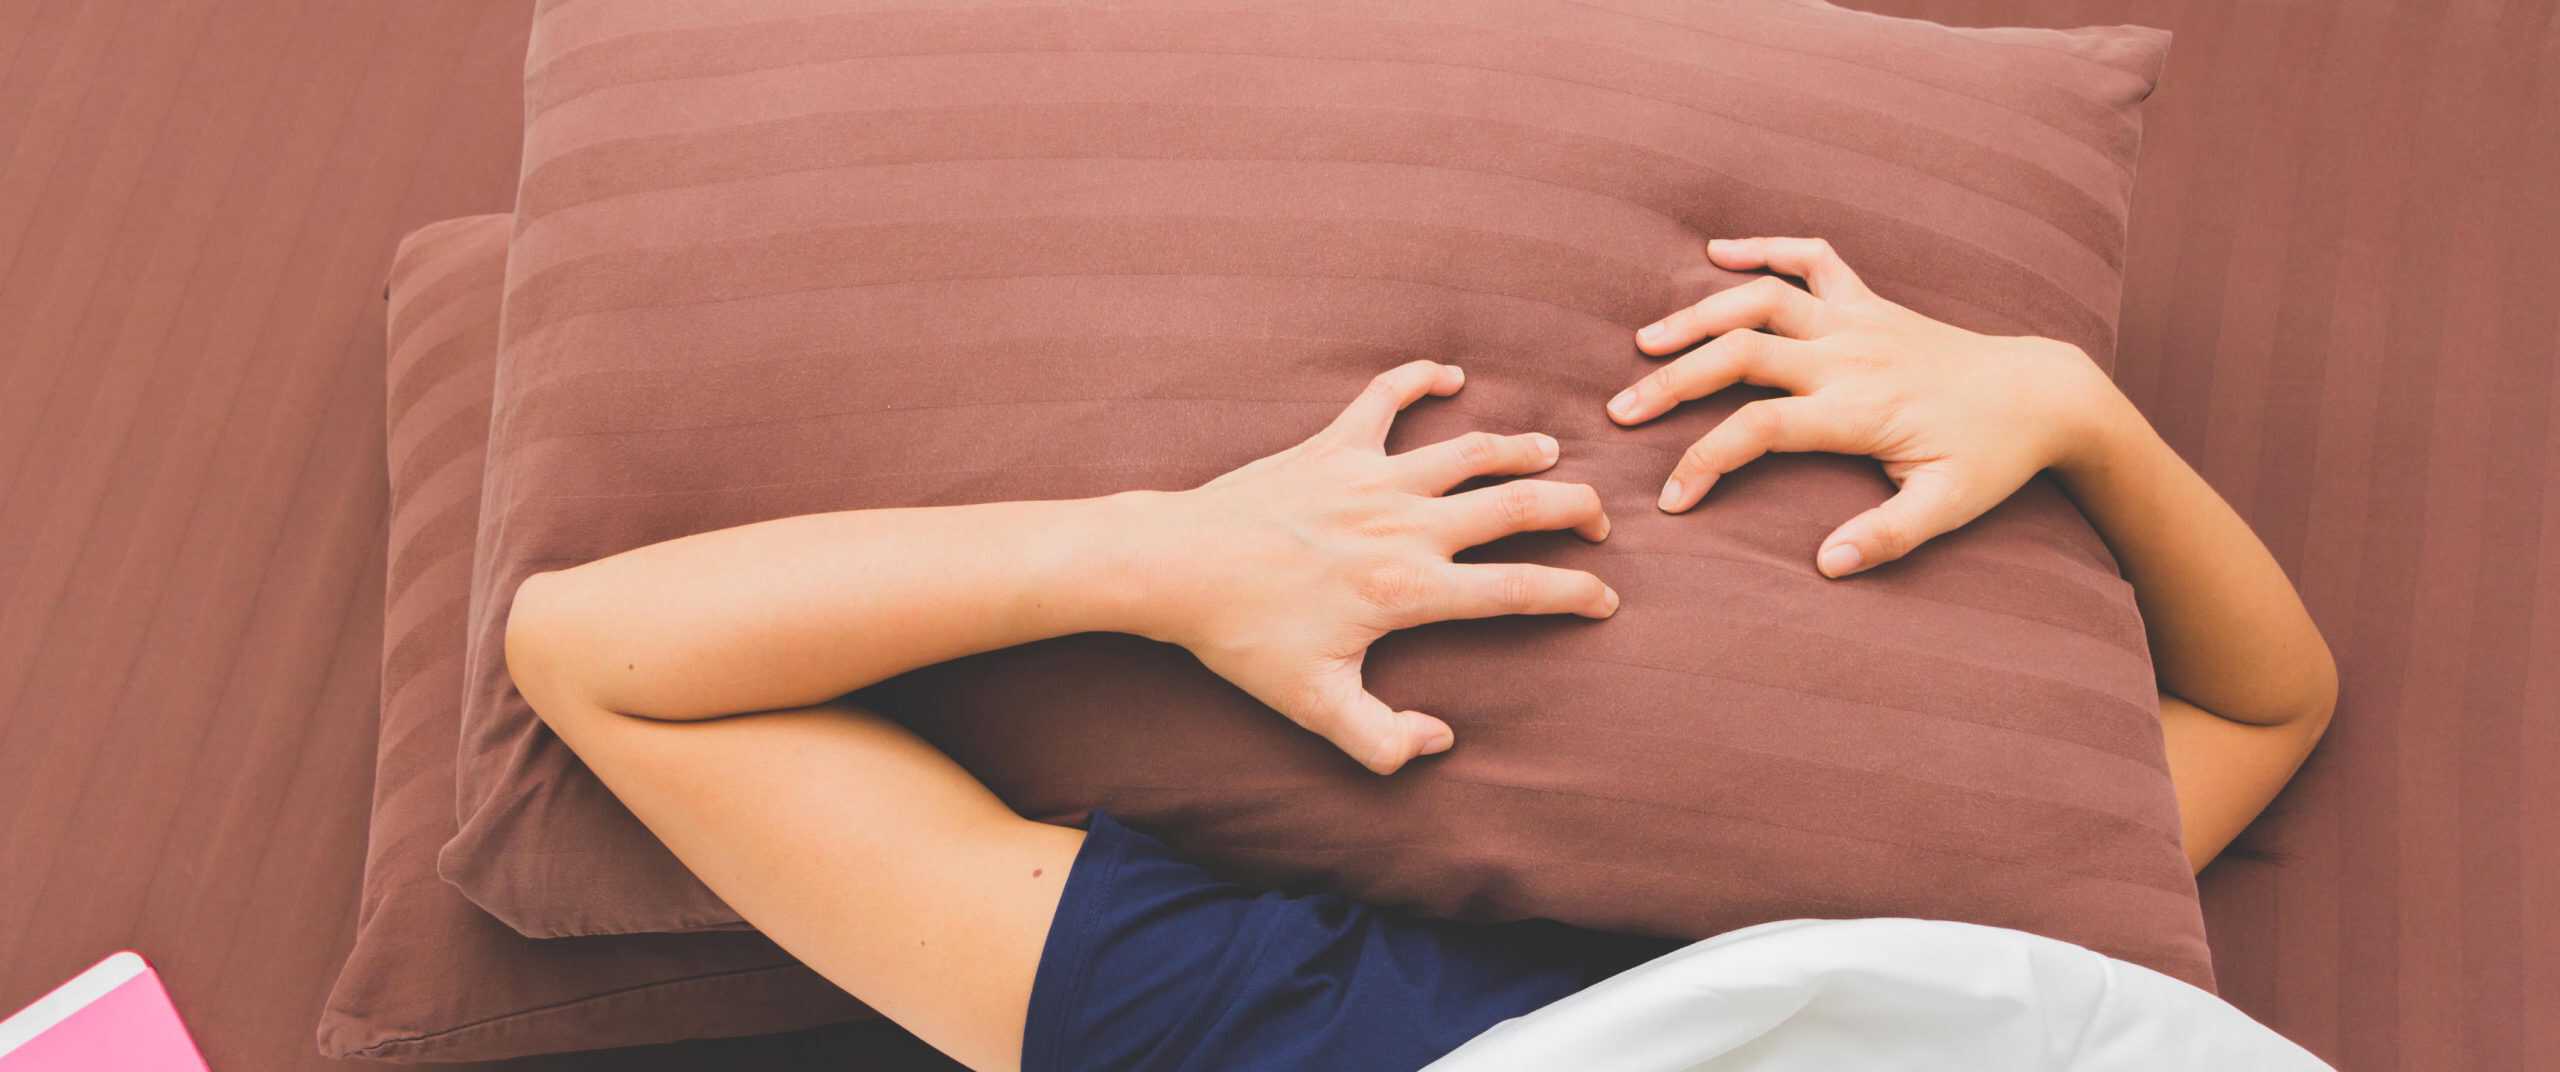 Person lying down with a pillow covering their face and hands gripping the pillow.